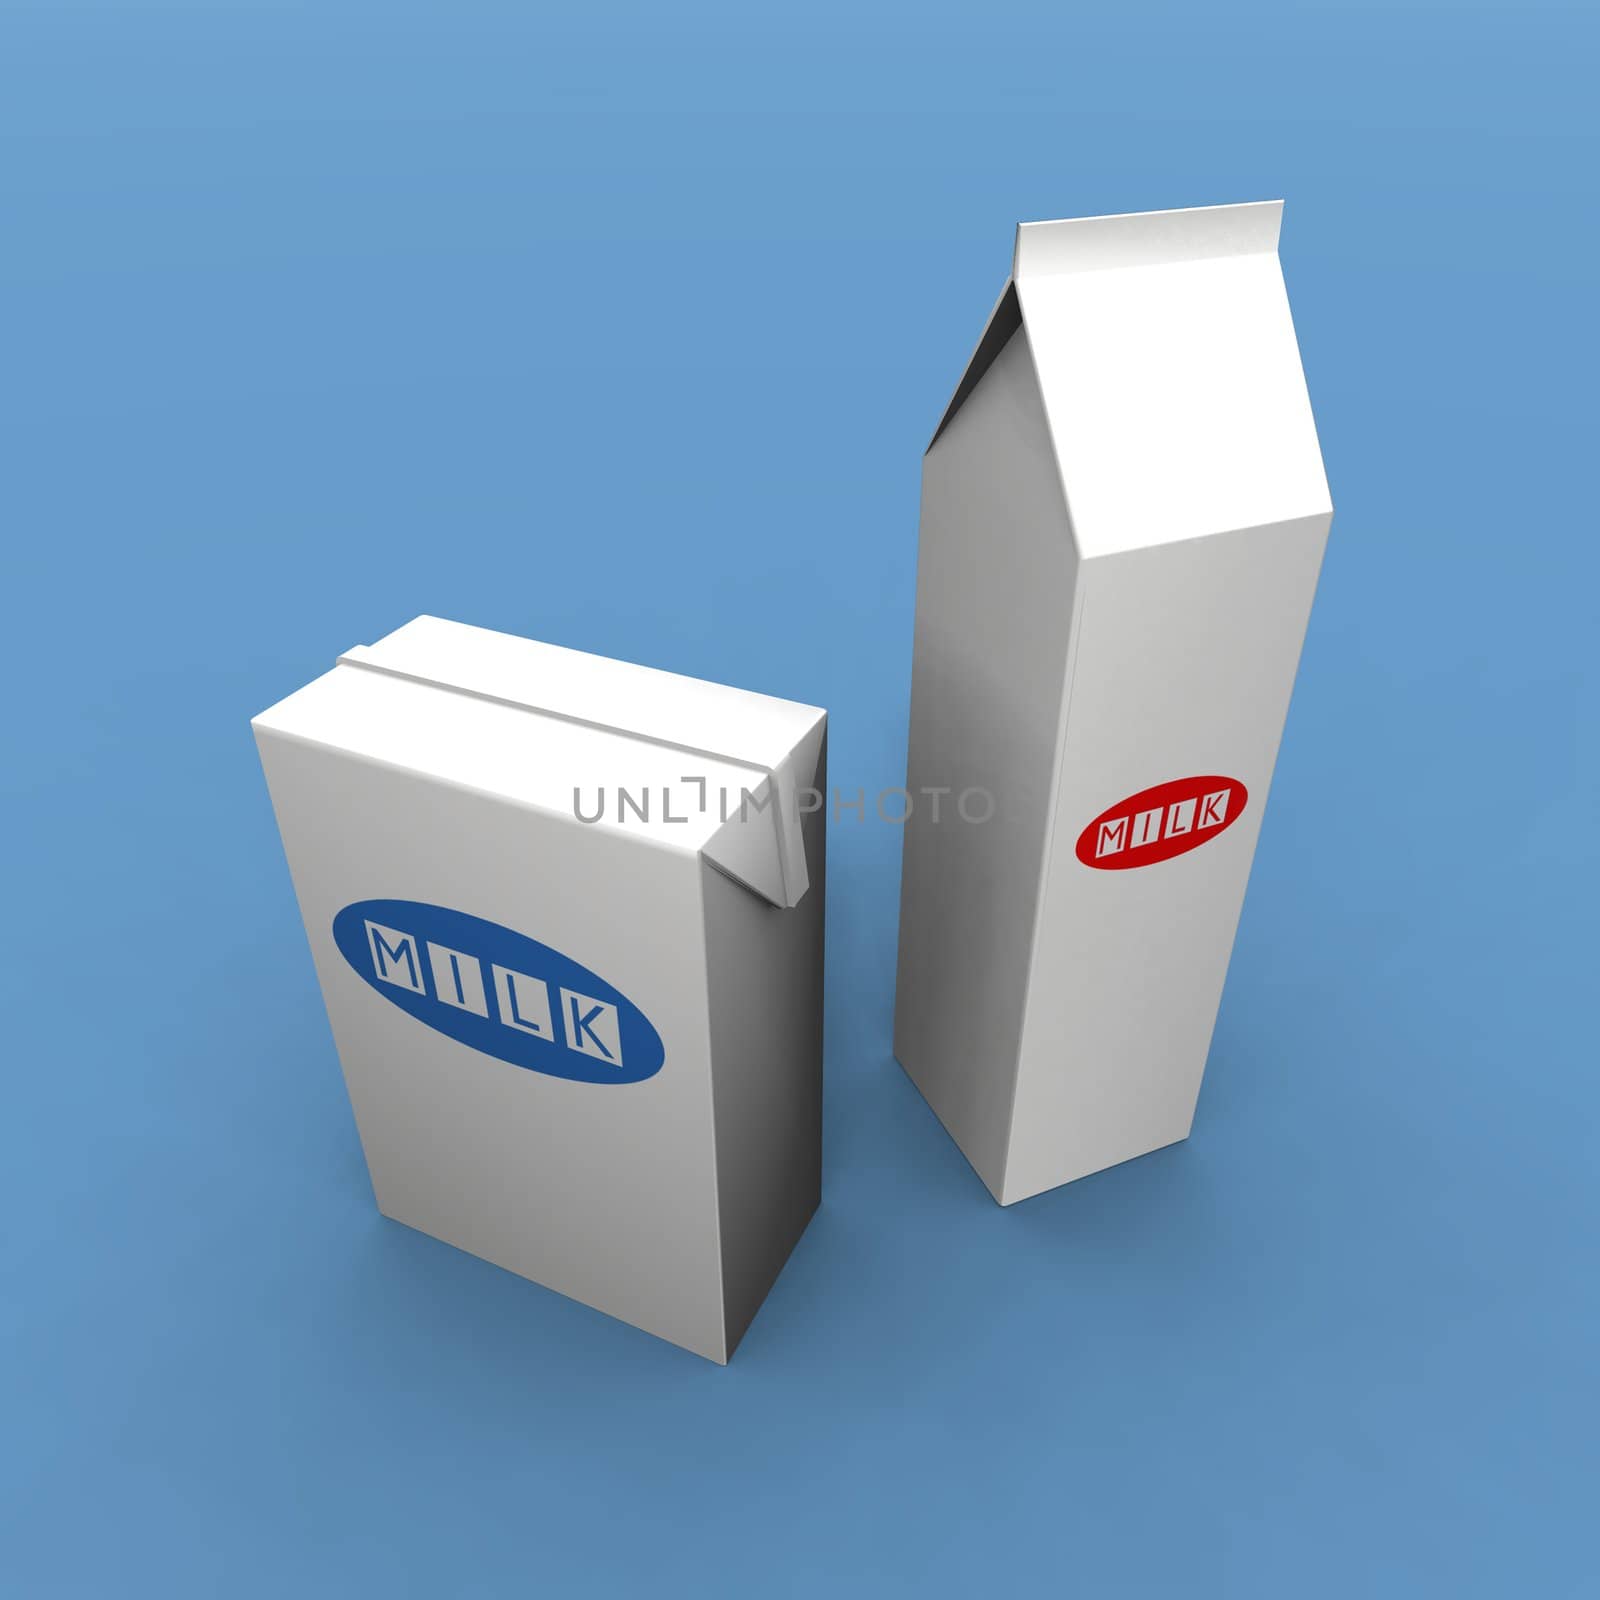 a 3d render of two milk packs on a blue background